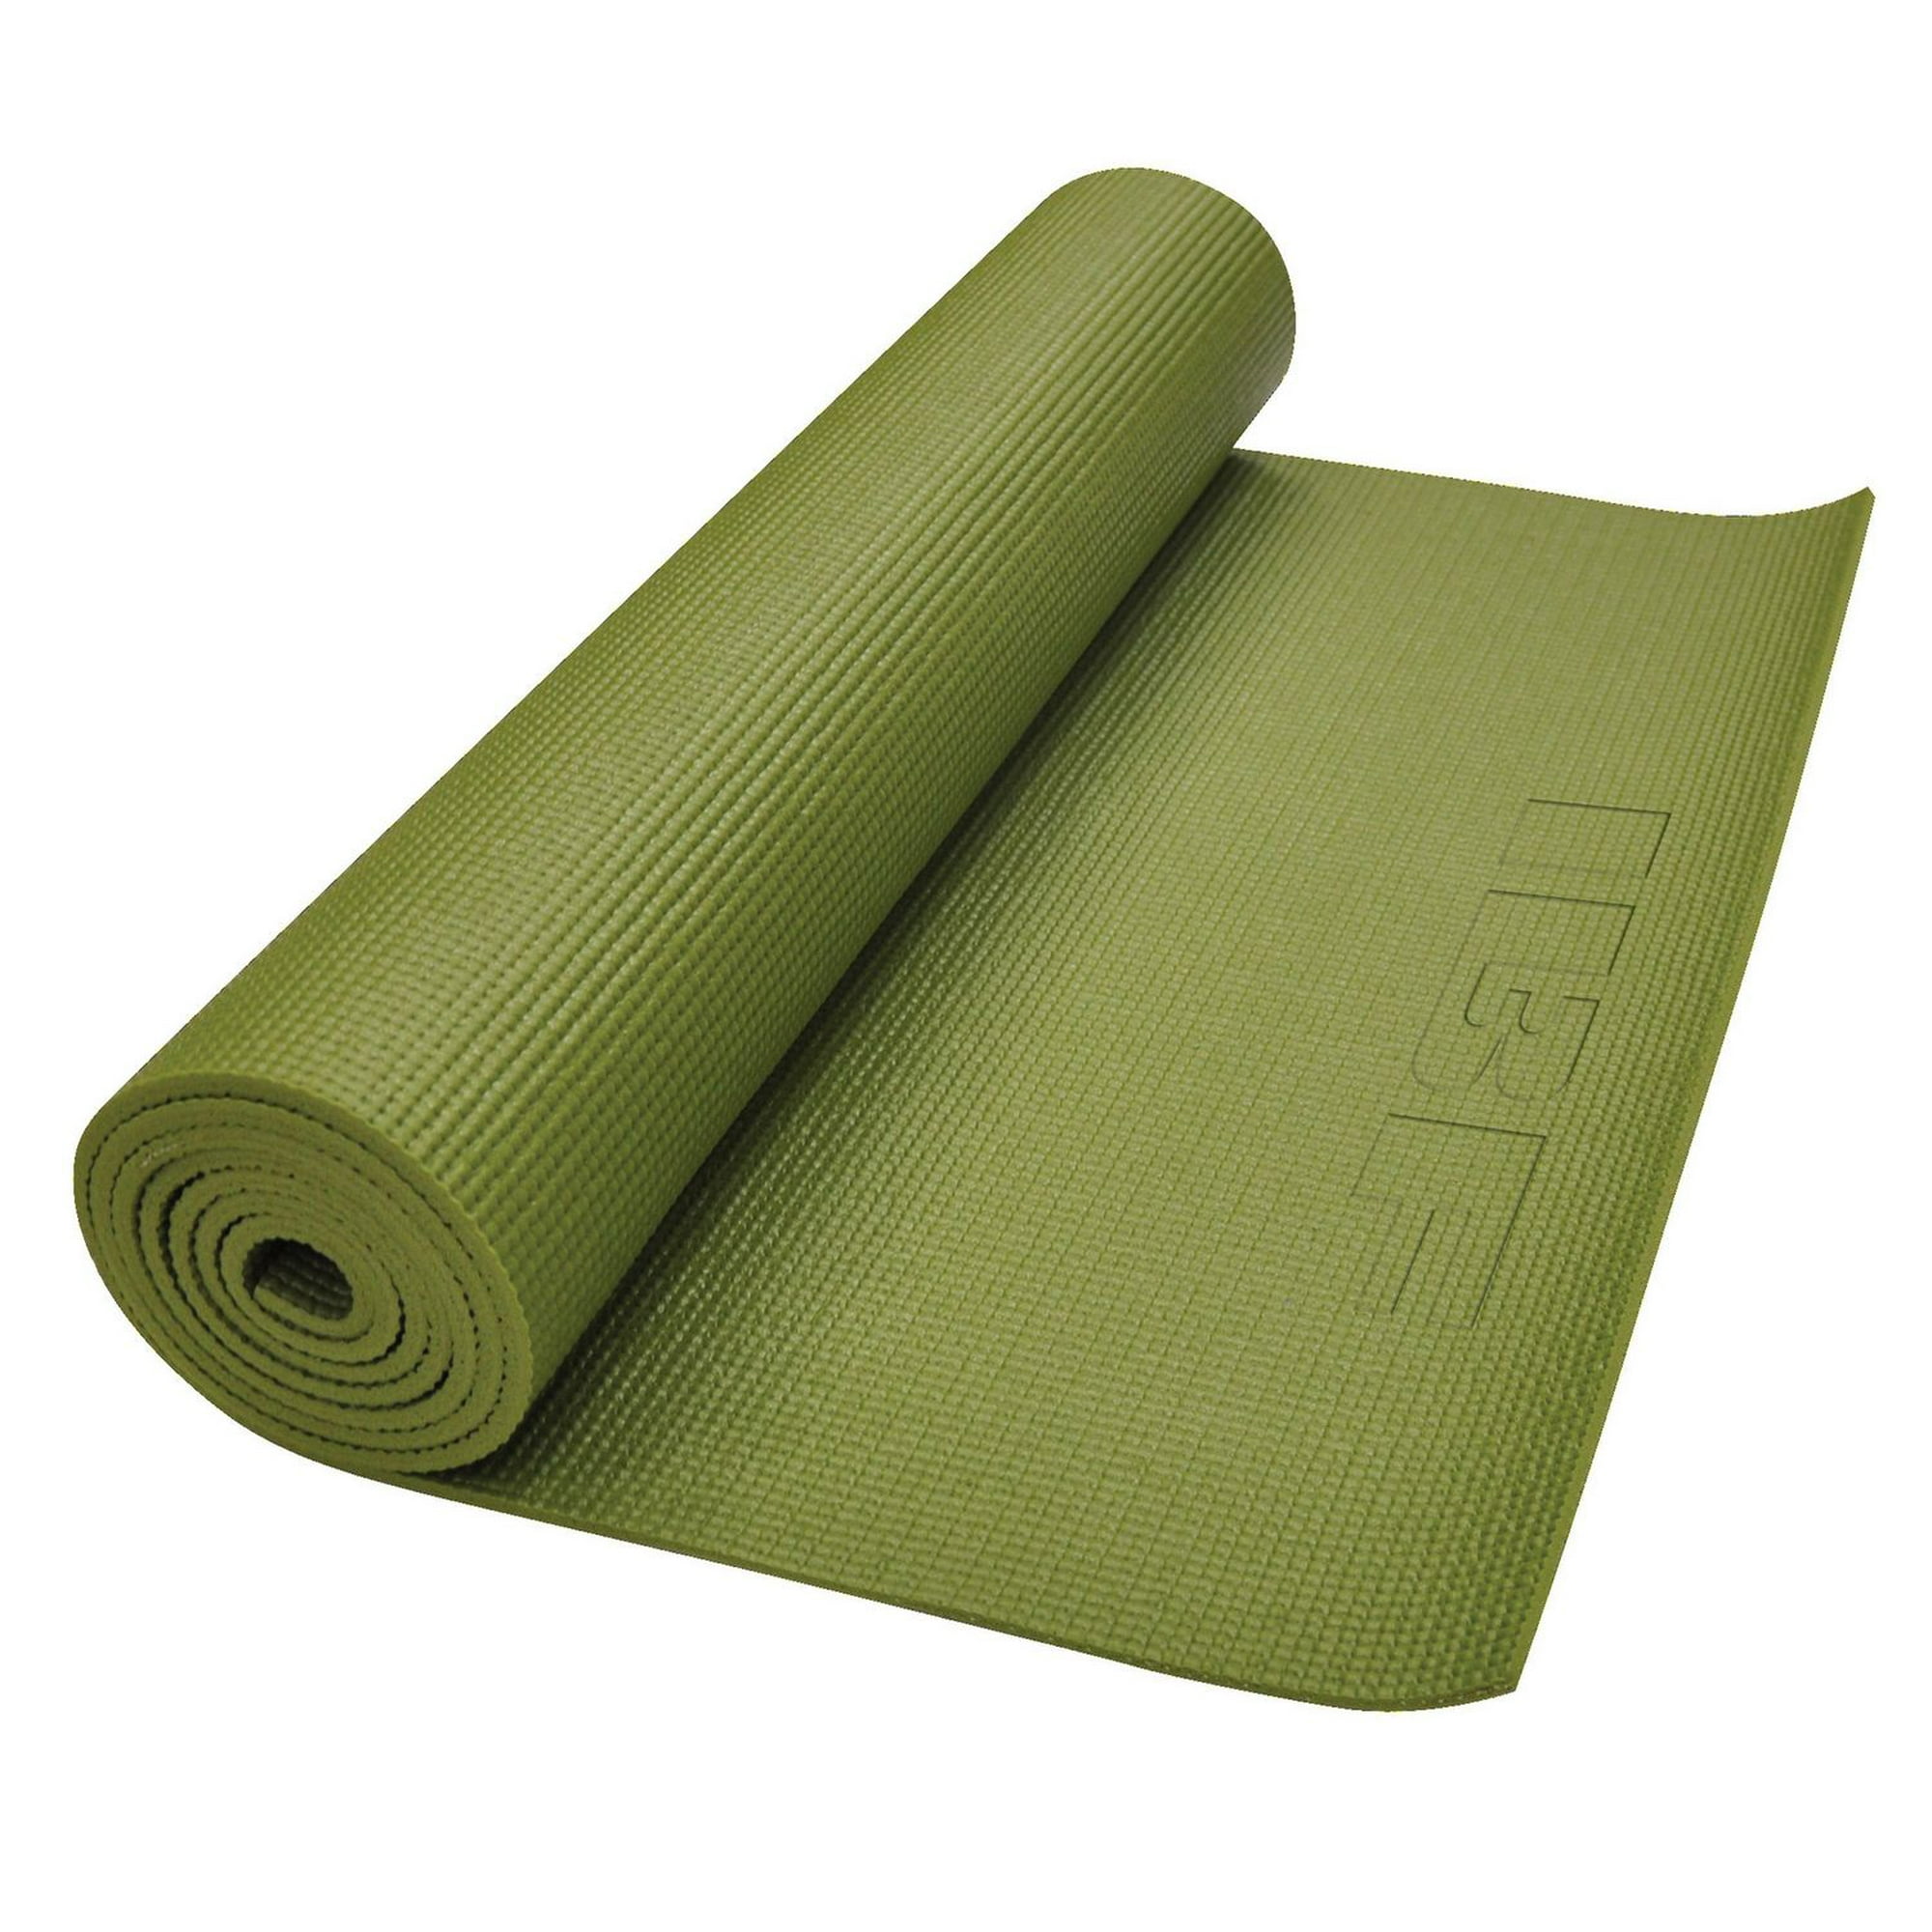 Buy MuscleXP Yoga Mat (10 mm) Extra Thick NBR Material for Men and